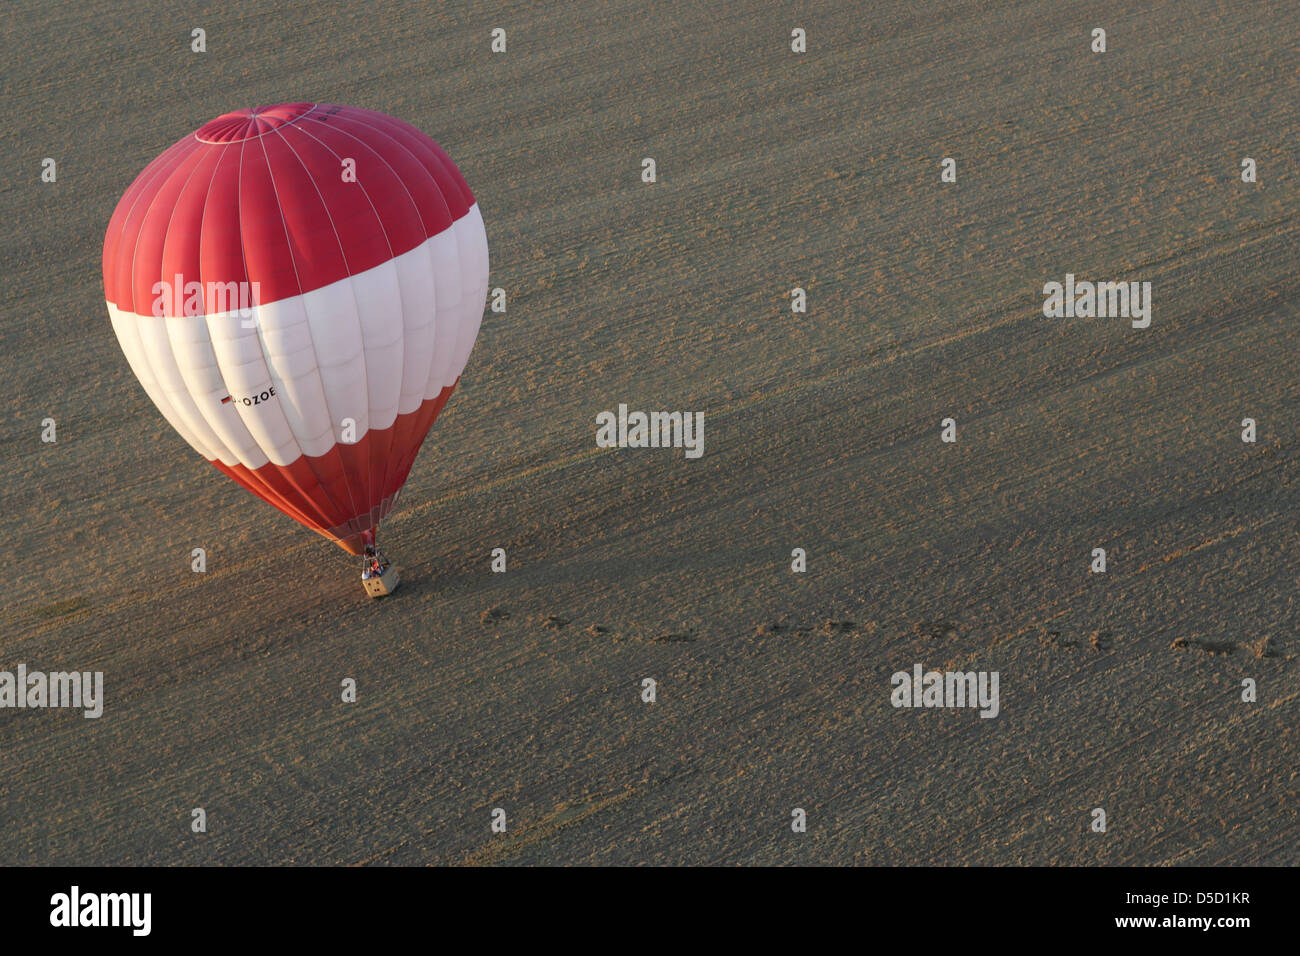 Magdeburg, Germany, in the hot air balloon landing in a field Stock Photo